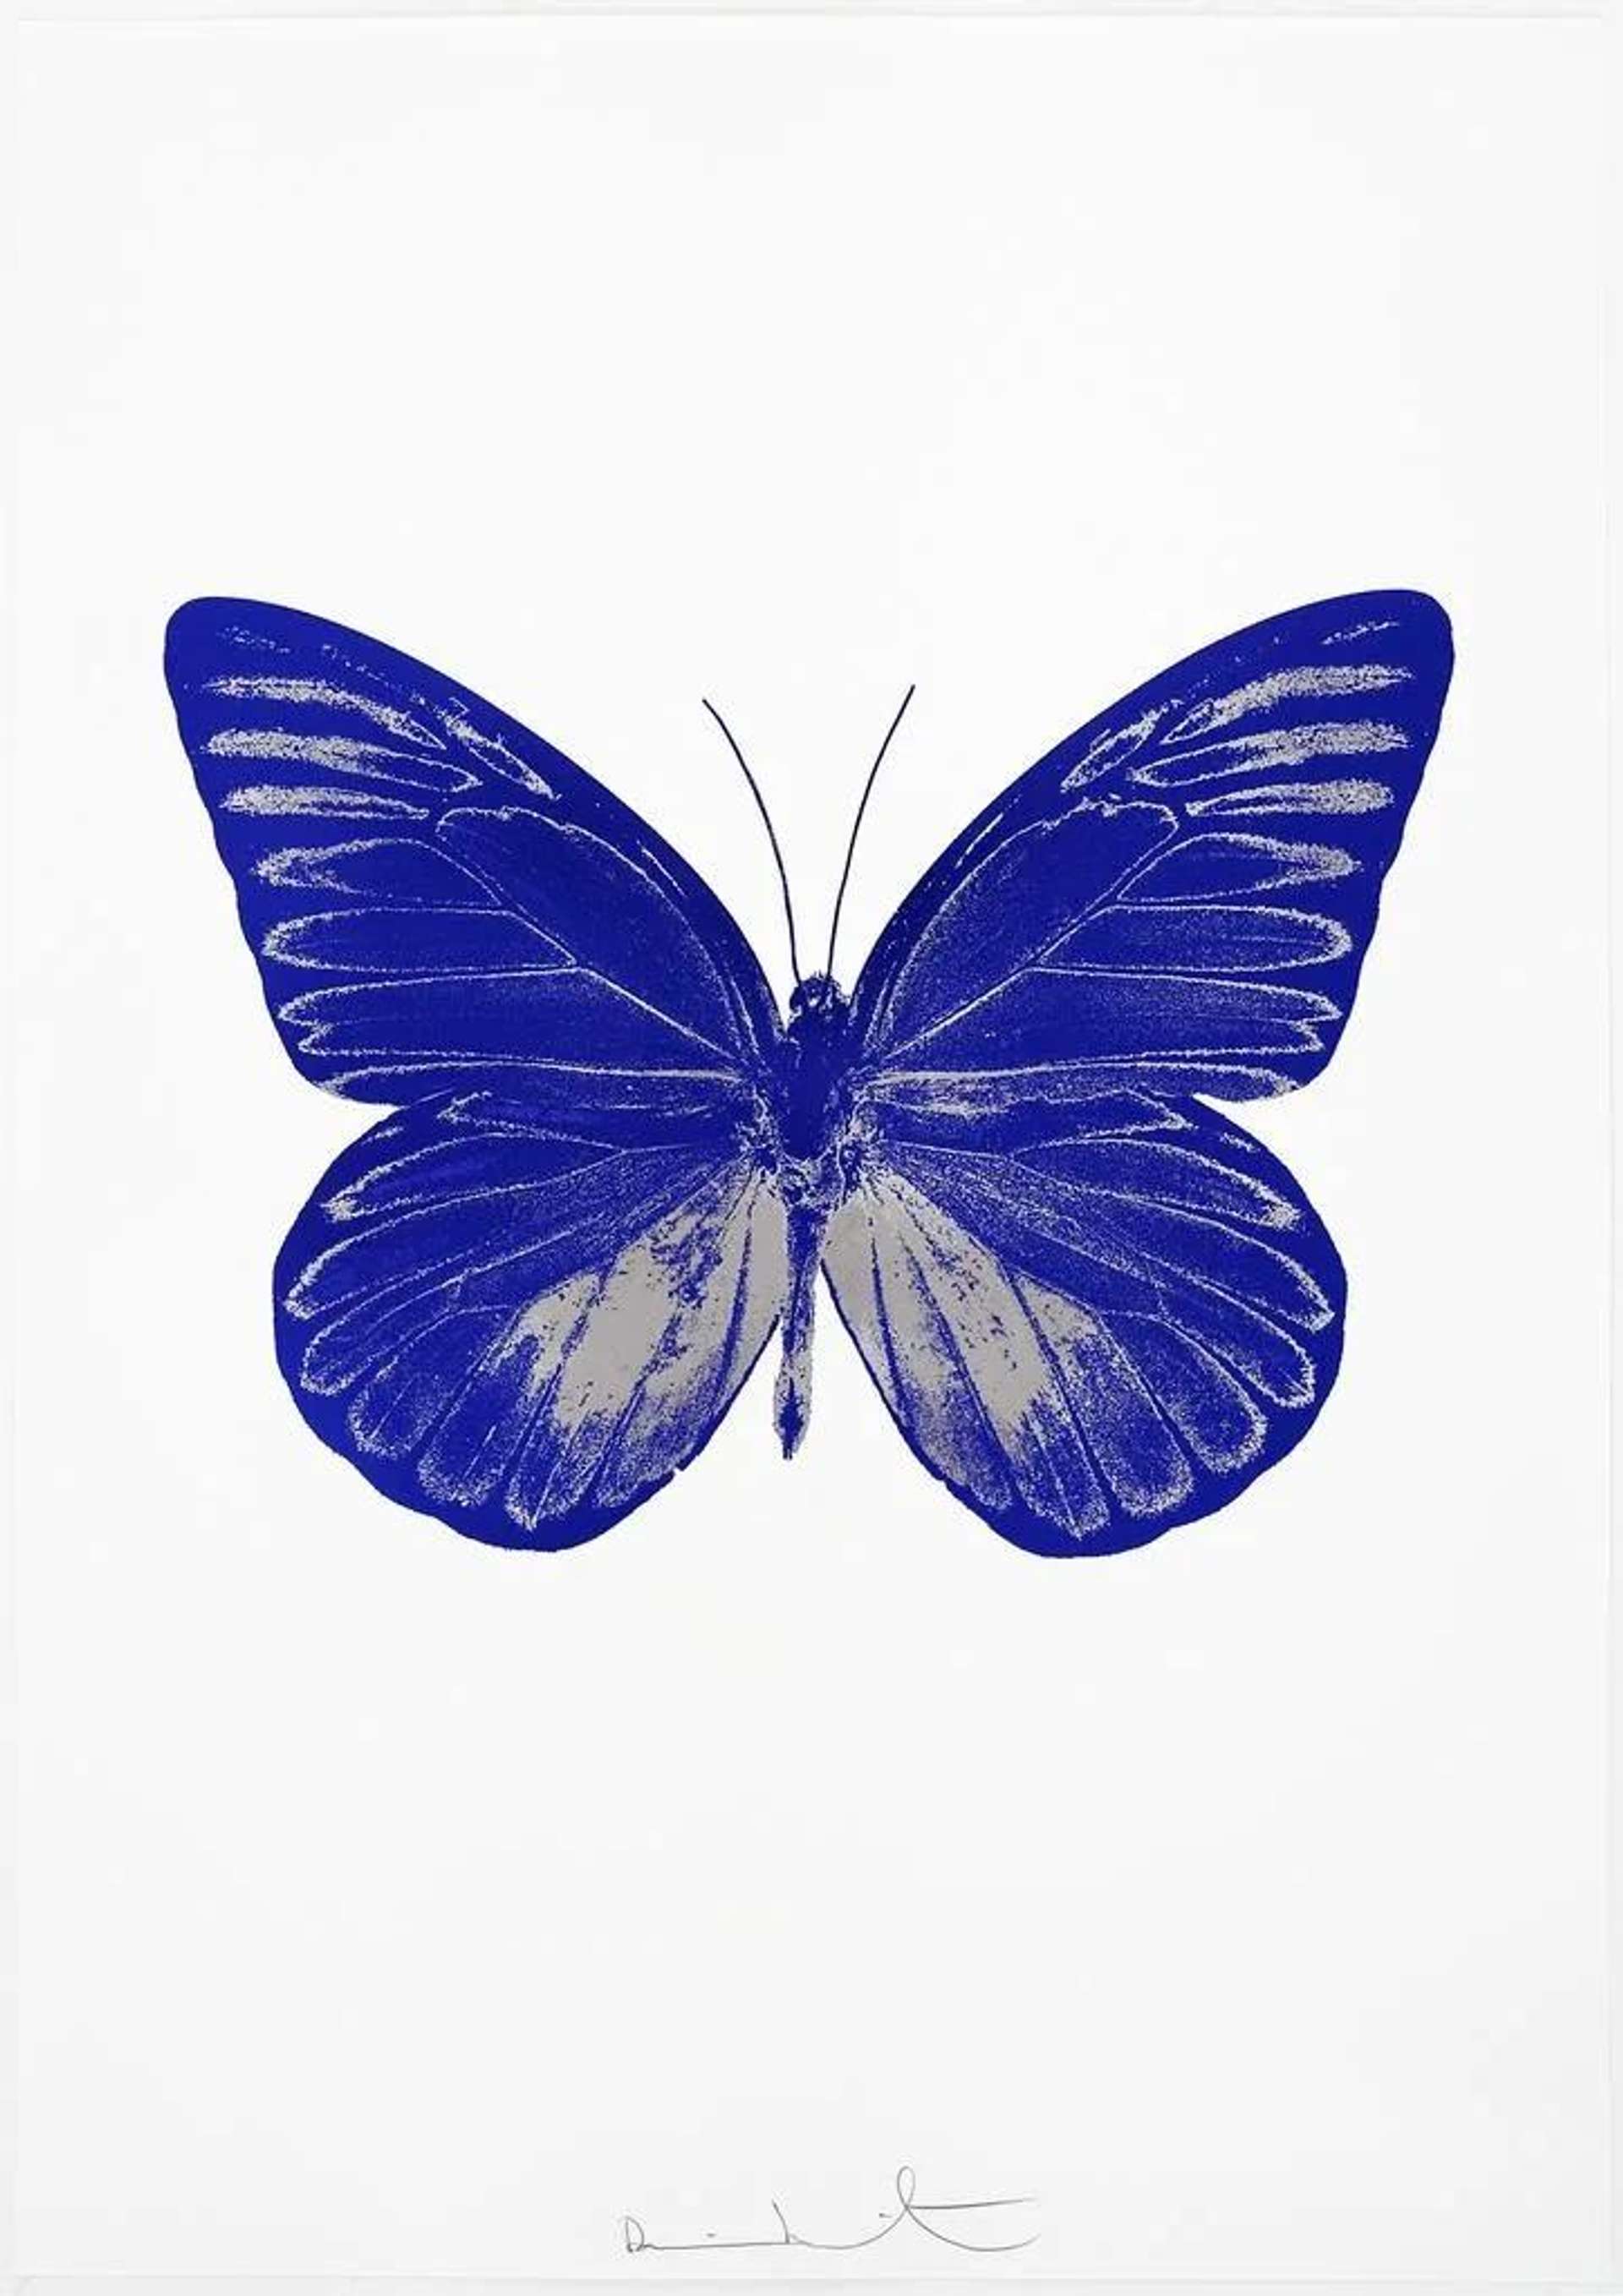 An image of the print The Souls I by Damien Hirst. It shows a purple butterfly against a white background.